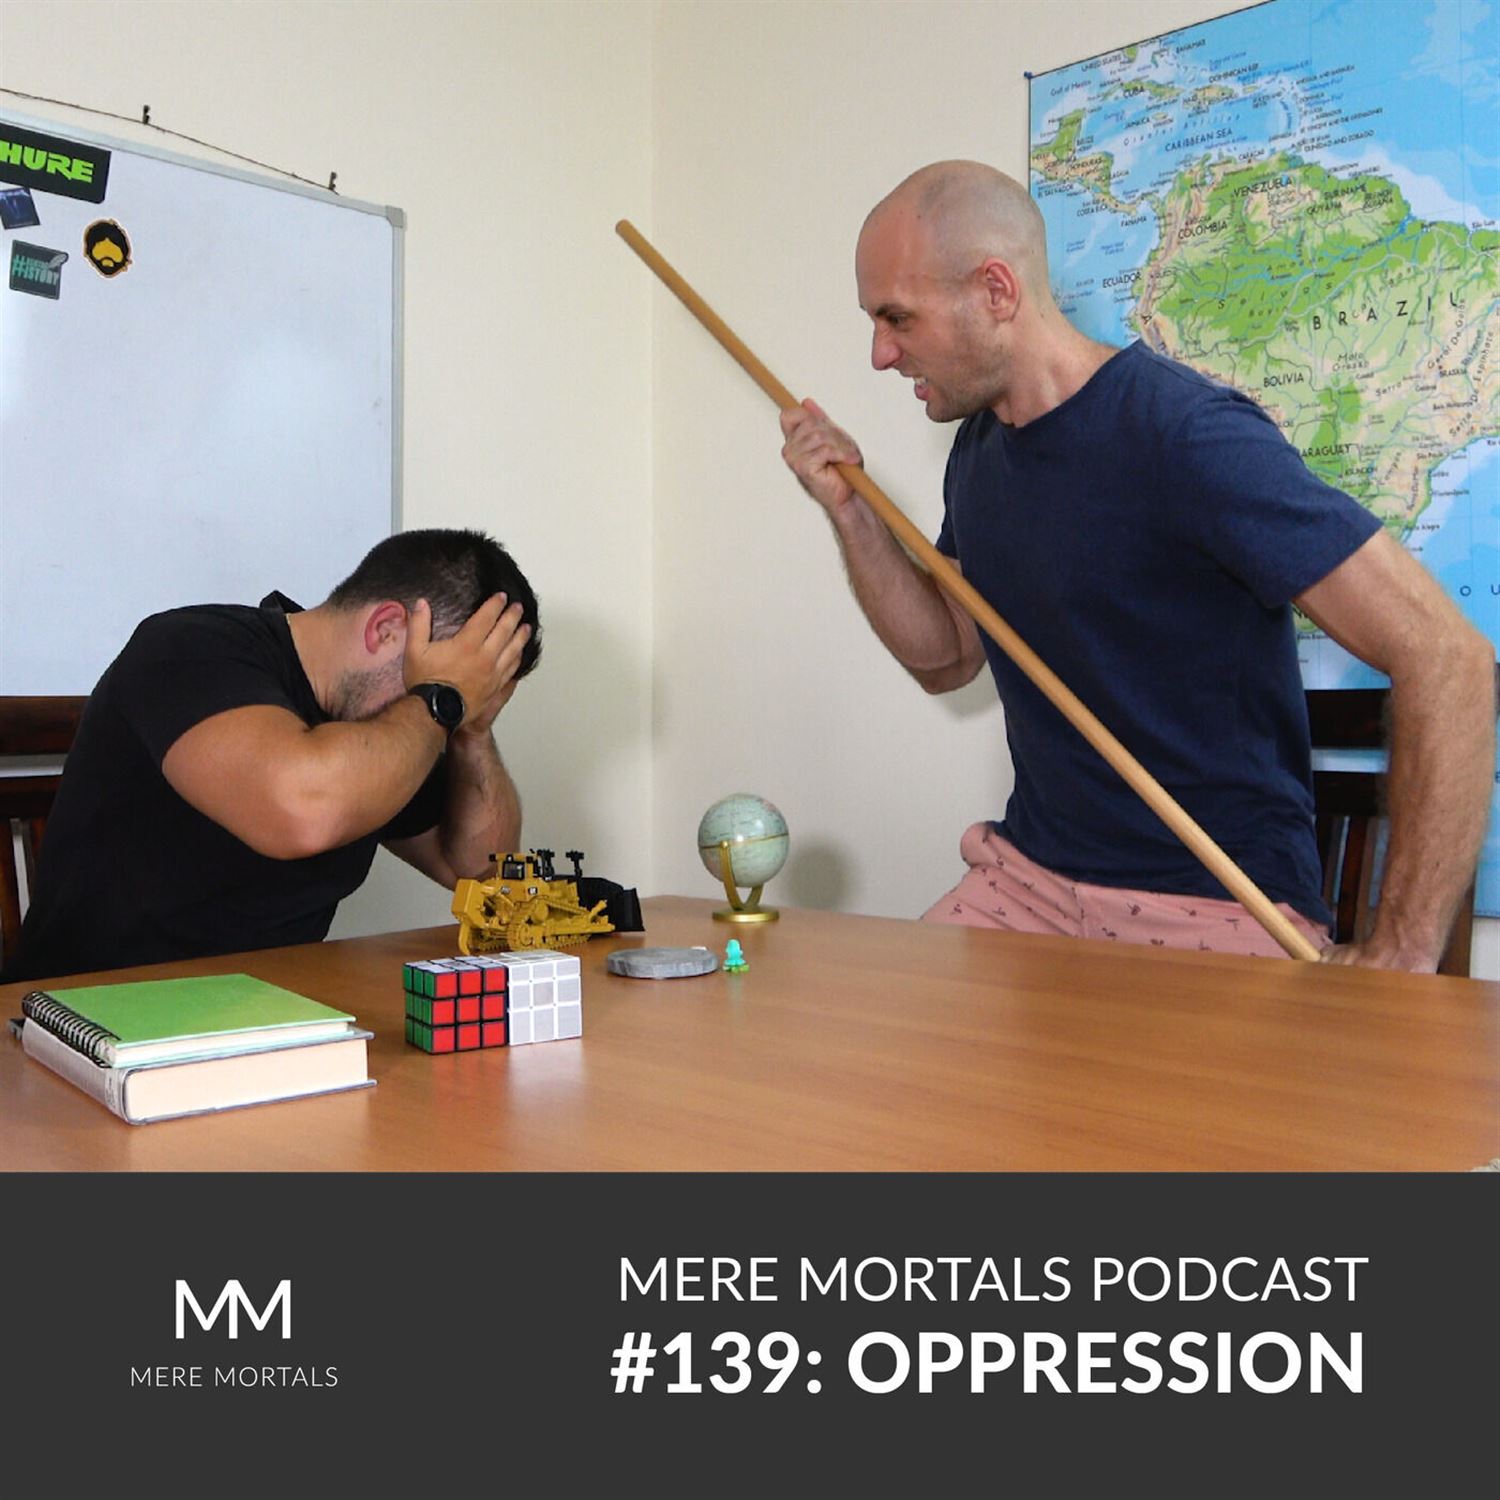 Is It Possible To Enjoy Being Oppressed? (Episode #139 - Oppression)